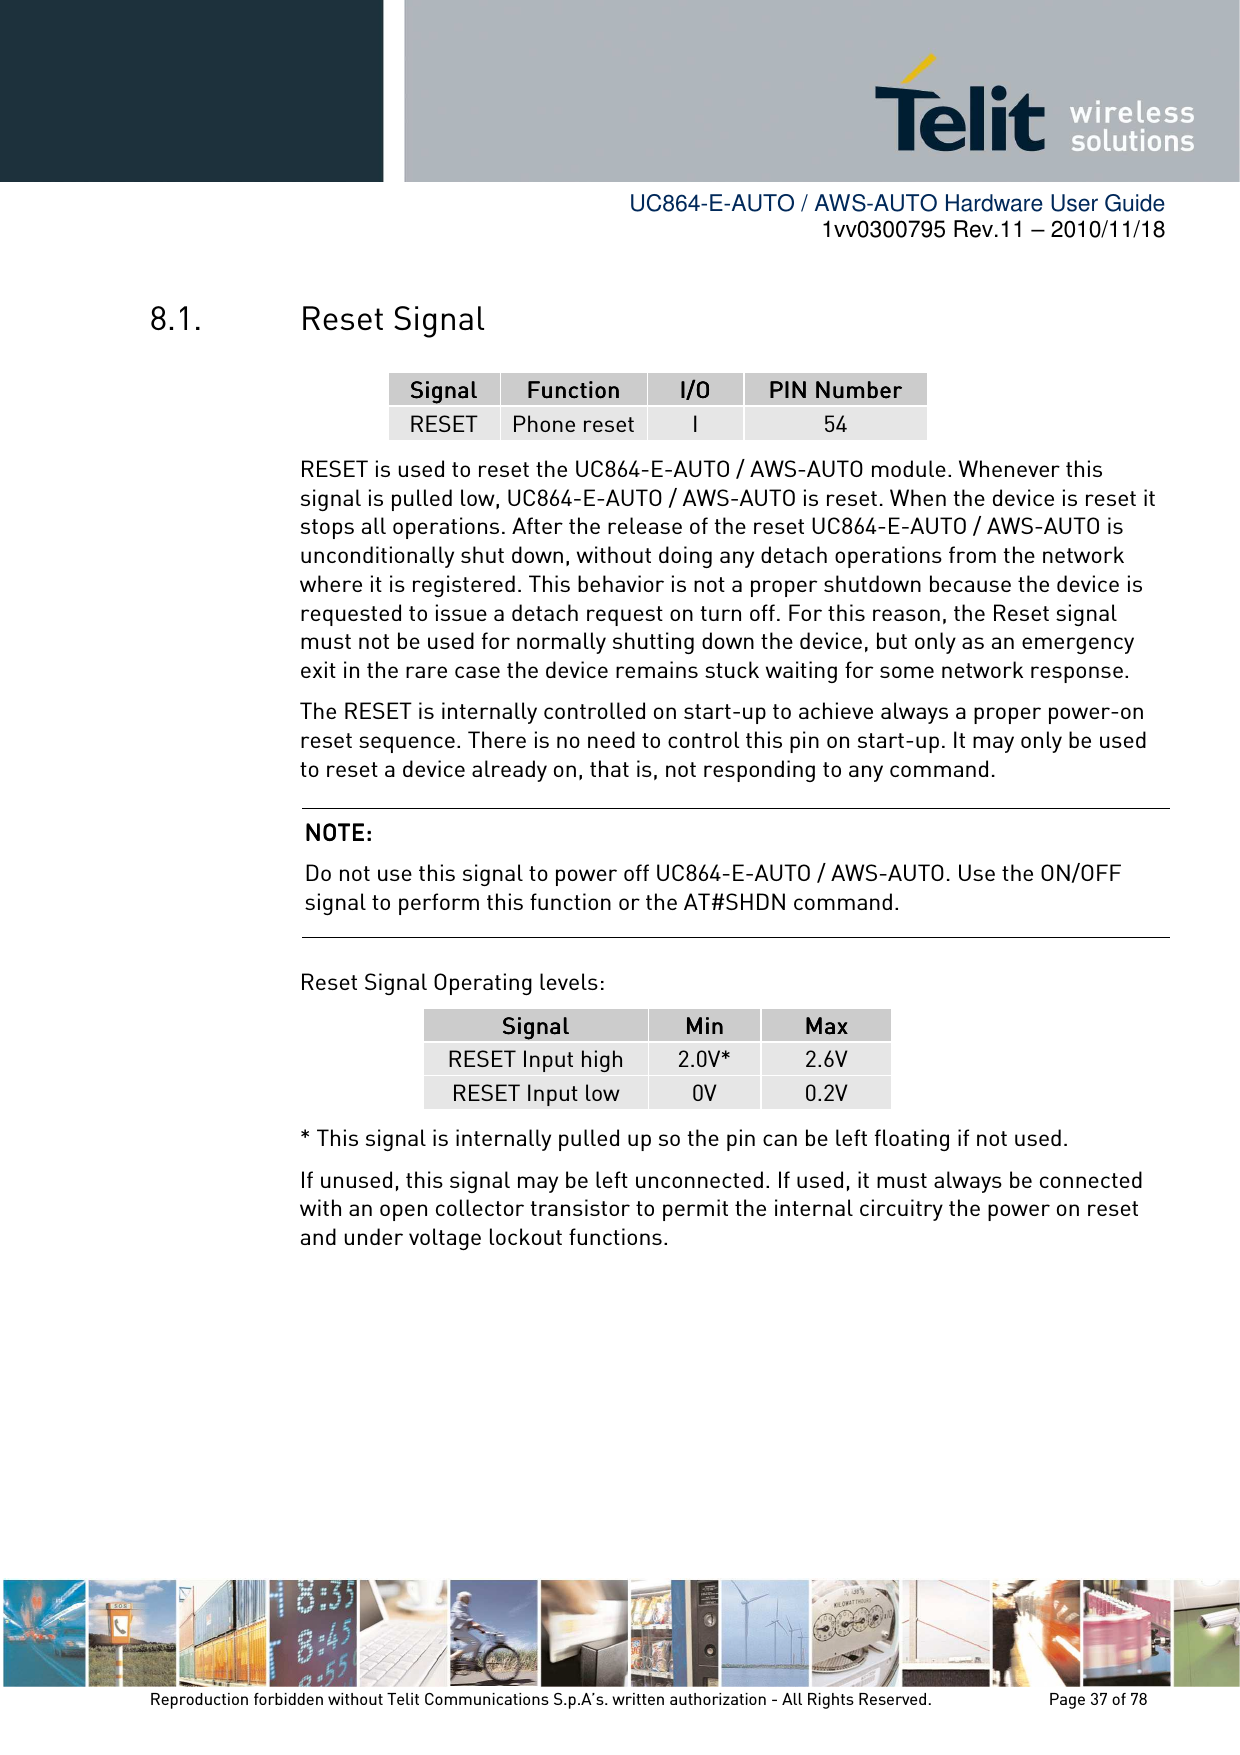        UC864-E-AUTO / AWS-AUTO Hardware User Guide 1vv0300795 Rev.11 – 2010/11/18     Reproduction forbidden without Telit Communications S.p.A’s. written authorization - All Rights Reserved.    Page 37 of 78  8.1. Reset Signal SignalSignalSignalSignal     FunctionFunctionFunctionFunction     I/OI/OI/OI/O     PIN NumberPIN NumberPIN NumberPIN Number    RESET  Phone reset I  54 RESET is used to reset the UC864-E-AUTO / AWS-AUTO module. Whenever this signal is pulled low, UC864-E-AUTO / AWS-AUTO is reset. When the device is reset it stops all operations. After the release of the reset UC864-E-AUTO / AWS-AUTO is unconditionally shut down, without doing any detach operations from the network where it is registered. This behavior is not a proper shutdown because the device is requested to issue a detach request on turn off. For this reason, the Reset signal must not be used for normally shutting down the device, but only as an emergency exit in the rare case the device remains stuck waiting for some network response. The RESET is internally controlled on start-up to achieve always a proper power-on reset sequence. There is no need to control this pin on start-up. It may only be used to reset a device already on, that is, not responding to any command.  Reset Signal Operating levels: SignalSignalSignalSignal     MinMinMinMin     MaxMaxMaxMax    RESET Input high  2.0V*  2.6V RESET Input low  0V  0.2V * This signal is internally pulled up so the pin can be left floating if not used. If unused, this signal may be left unconnected. If used, it must always be connected with an open collector transistor to permit the internal circuitry the power on reset and under voltage lockout functions.       NOTE: NOTE: NOTE: NOTE:     Do not use this signal to power off UC864-E-AUTO / AWS-AUTO. Use the ON/OFF signal to perform this function or the AT#SHDN command.  